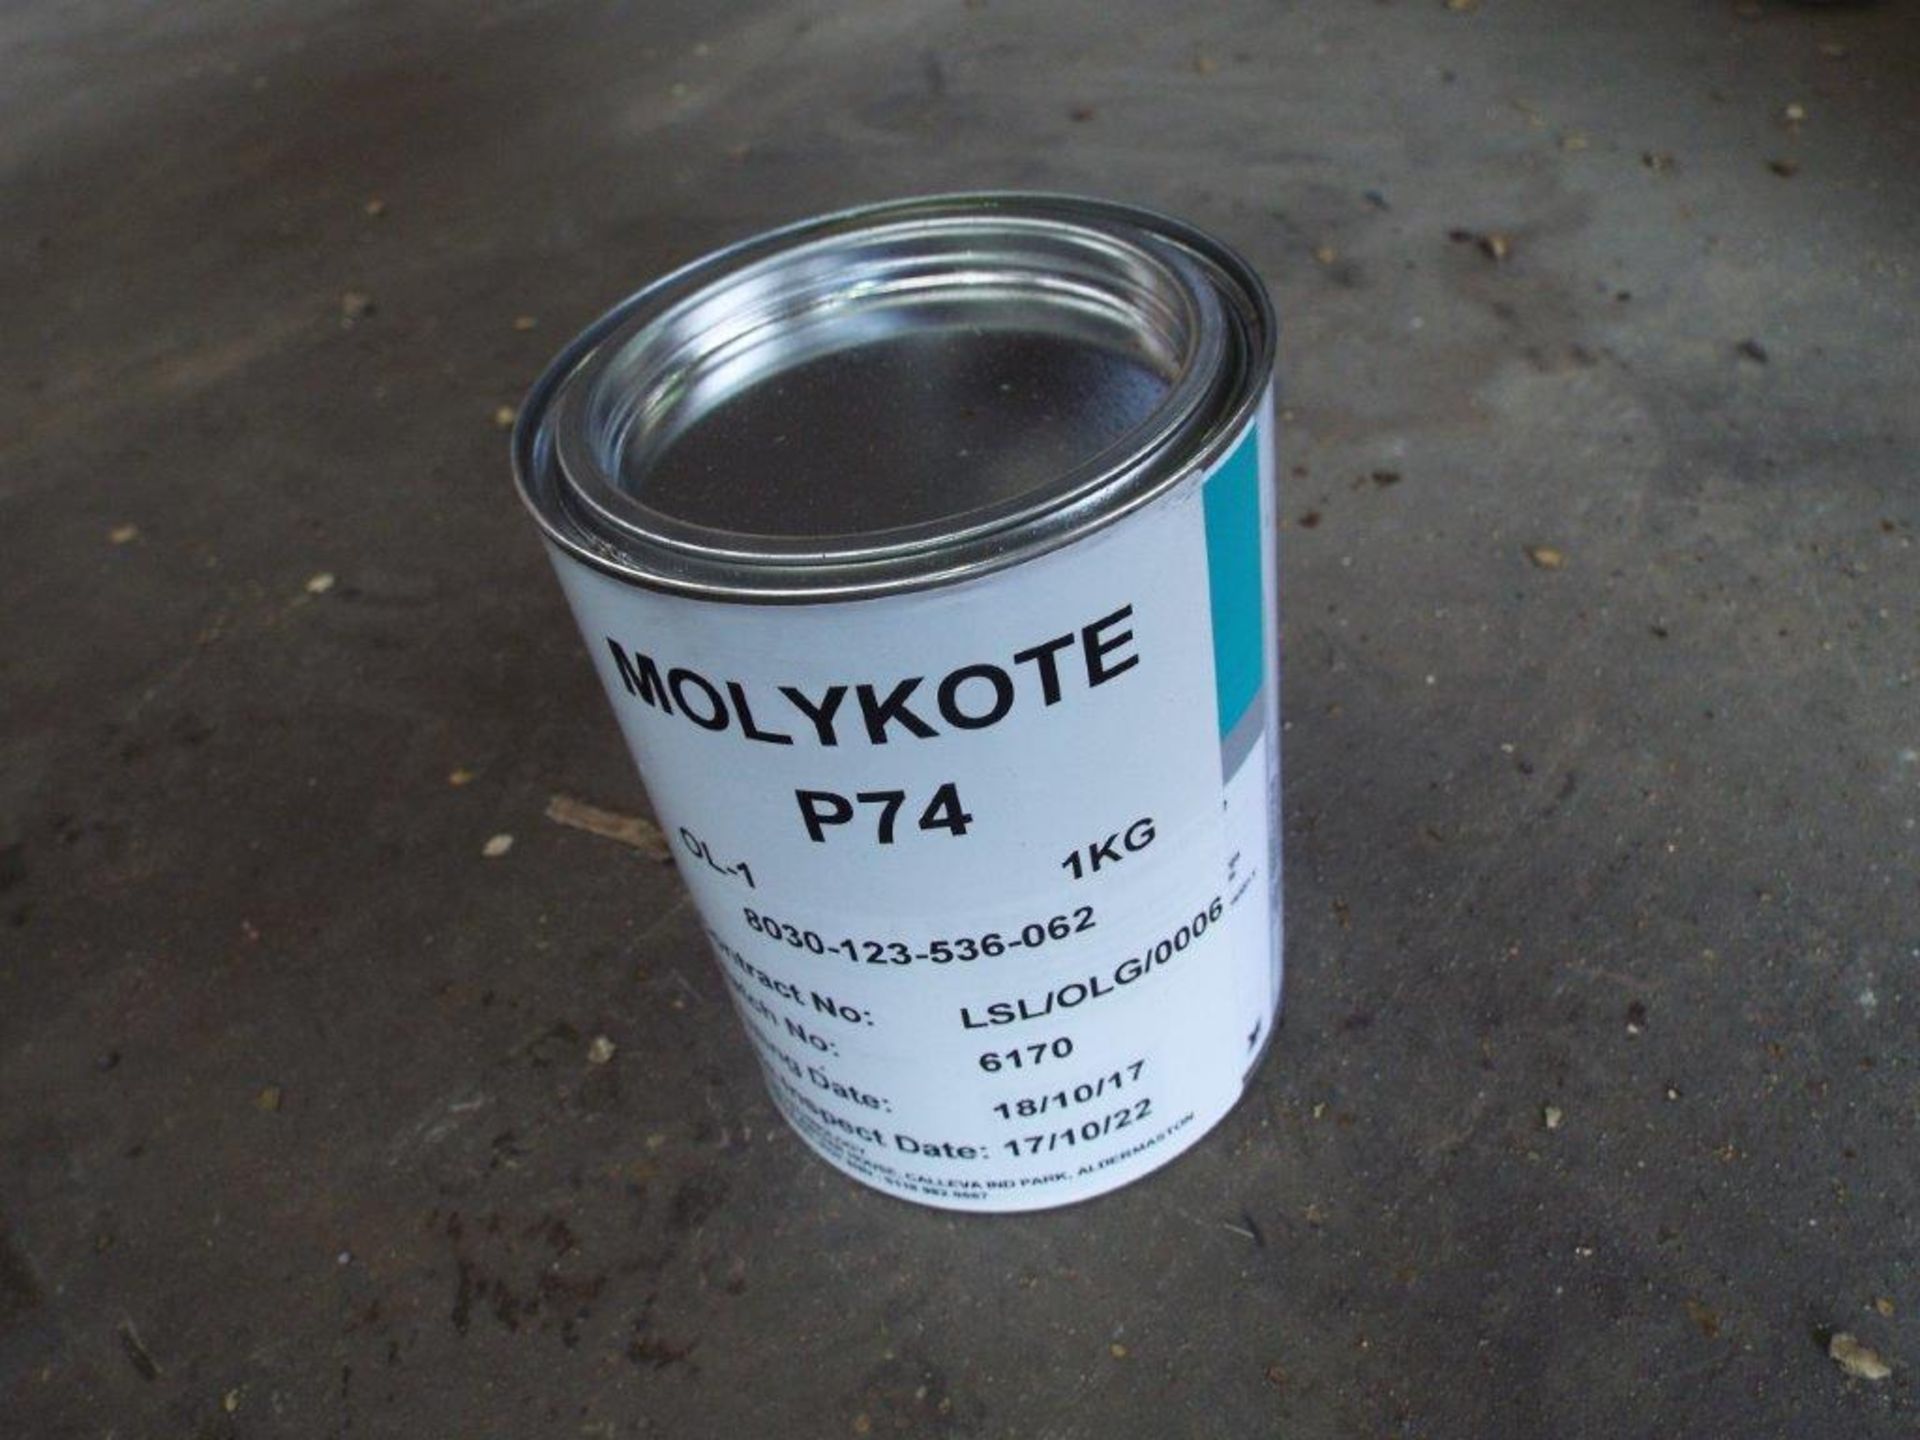 17 x Unissued 1Kg Tubs of Molykote P74 PTFE Super Anti-Seize Grease - Image 2 of 5